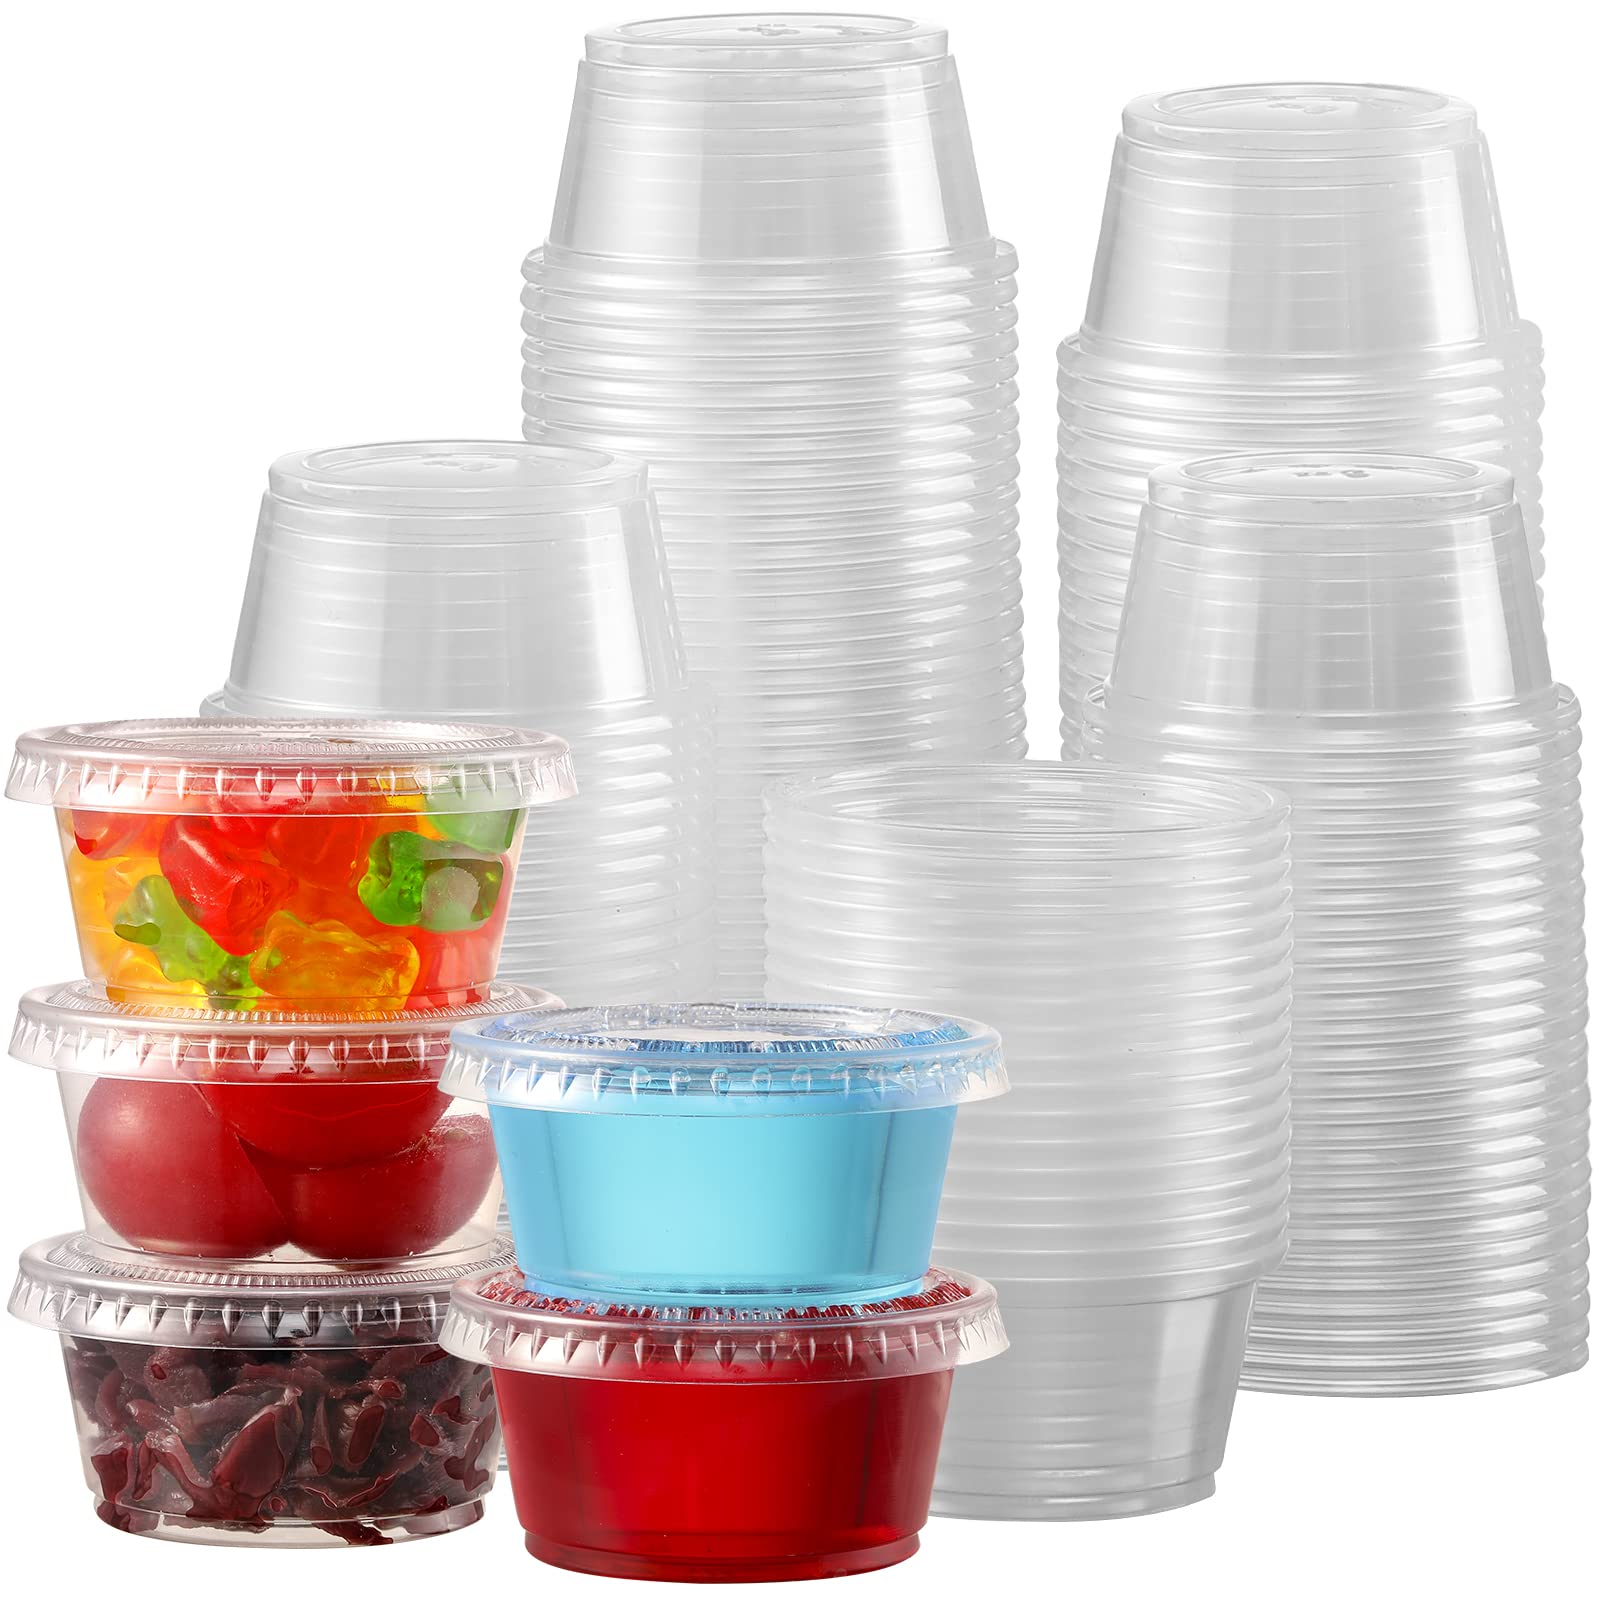 Jello Shot Party Cups 32 Pack 1 Oz Plastic Mini Cups, Choose From